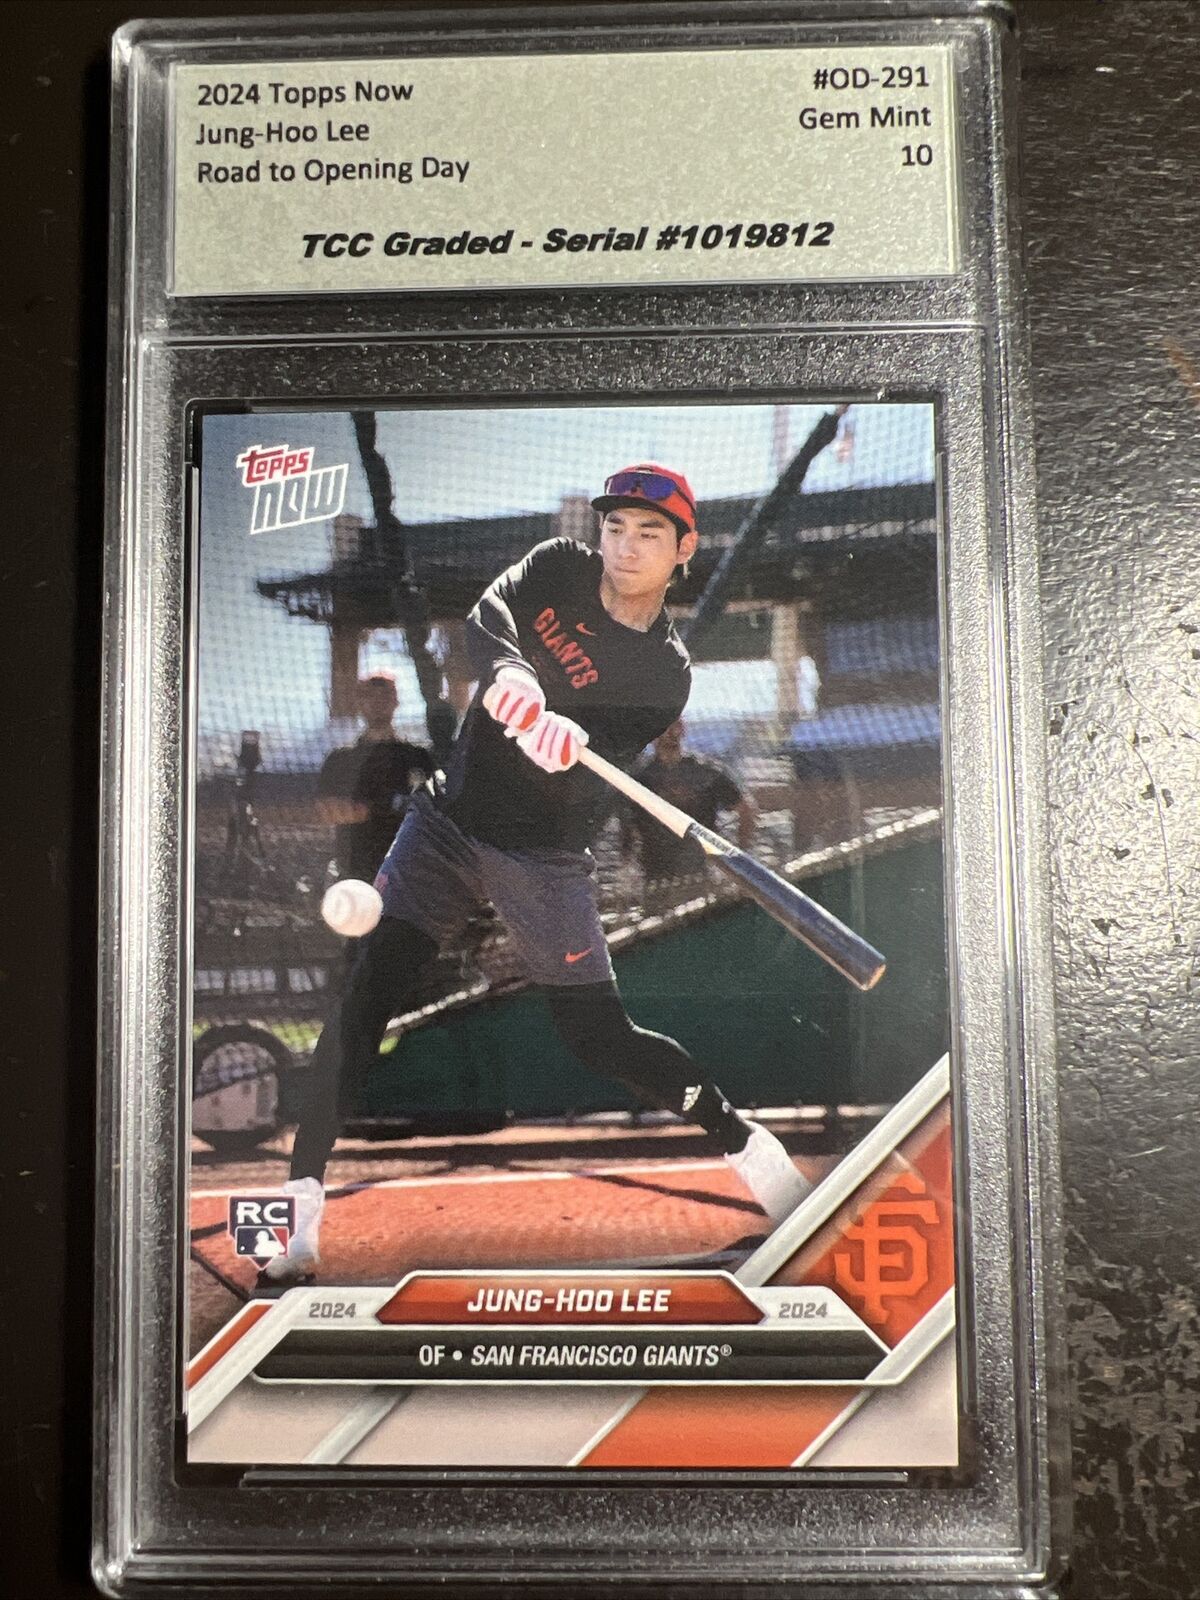 2024 Topps Now Road To Opening Day Jung-Hoo Lee TCC Graded Gem Mint 10